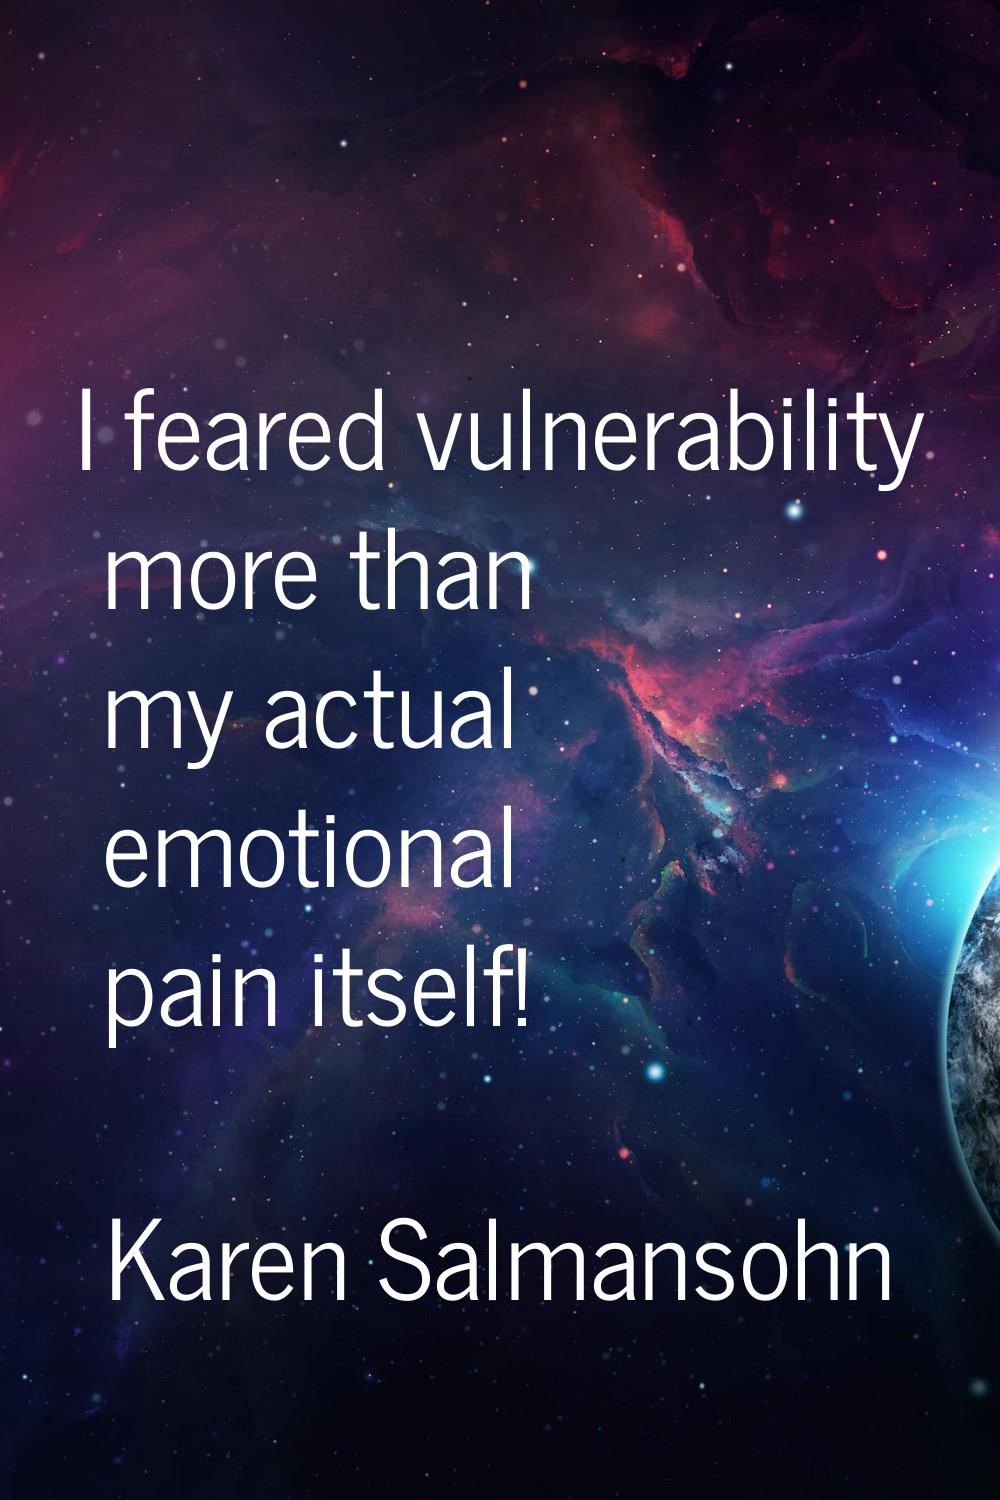 I feared vulnerability more than my actual emotional pain itself!